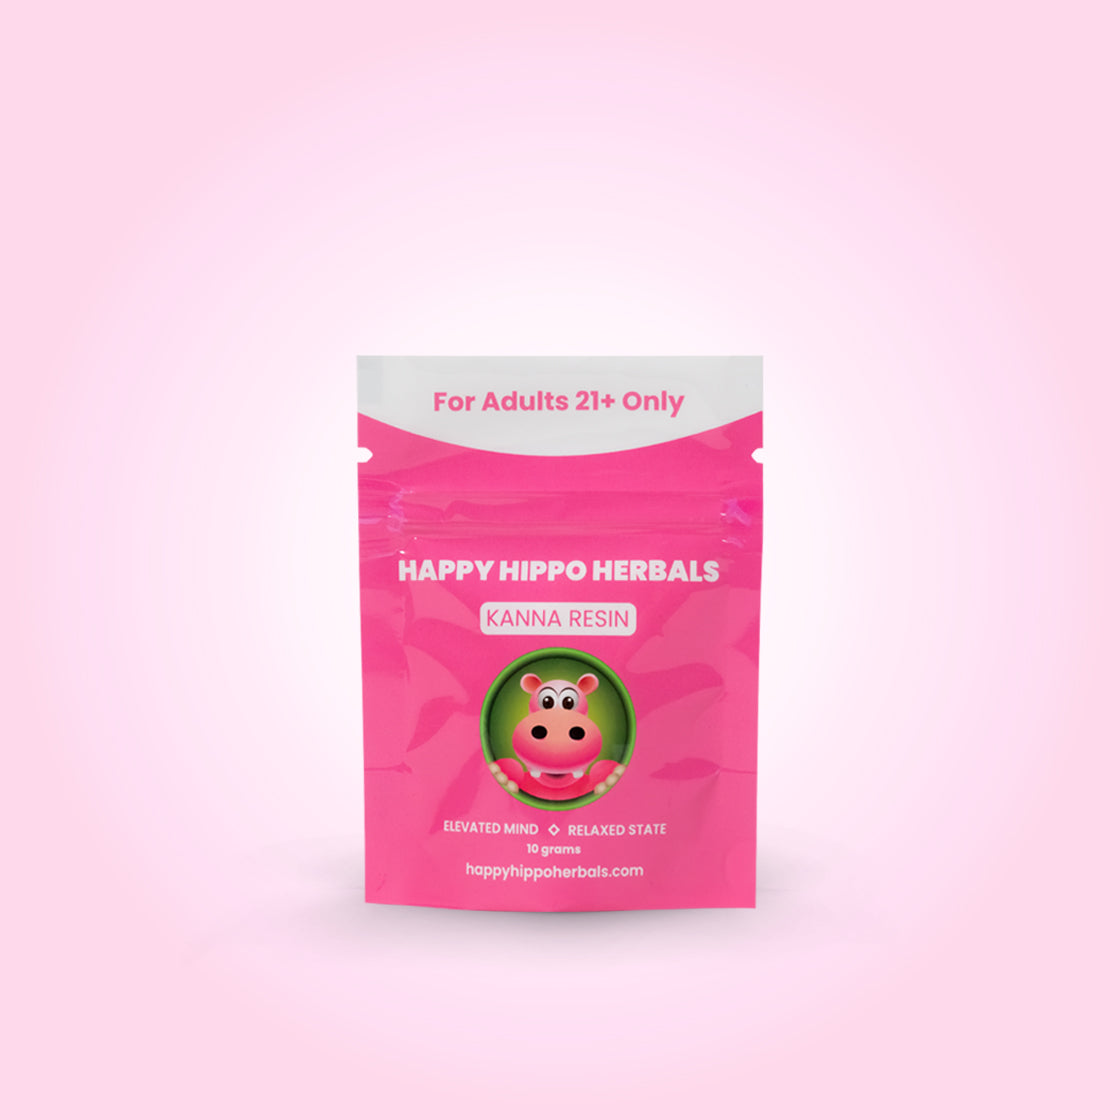 Featured Image depicting a 10-gram pink packet of Happy Hippo branded Kanna Resin Extract. Perfect for an Elevated Mind and attaining a Relaxed State.